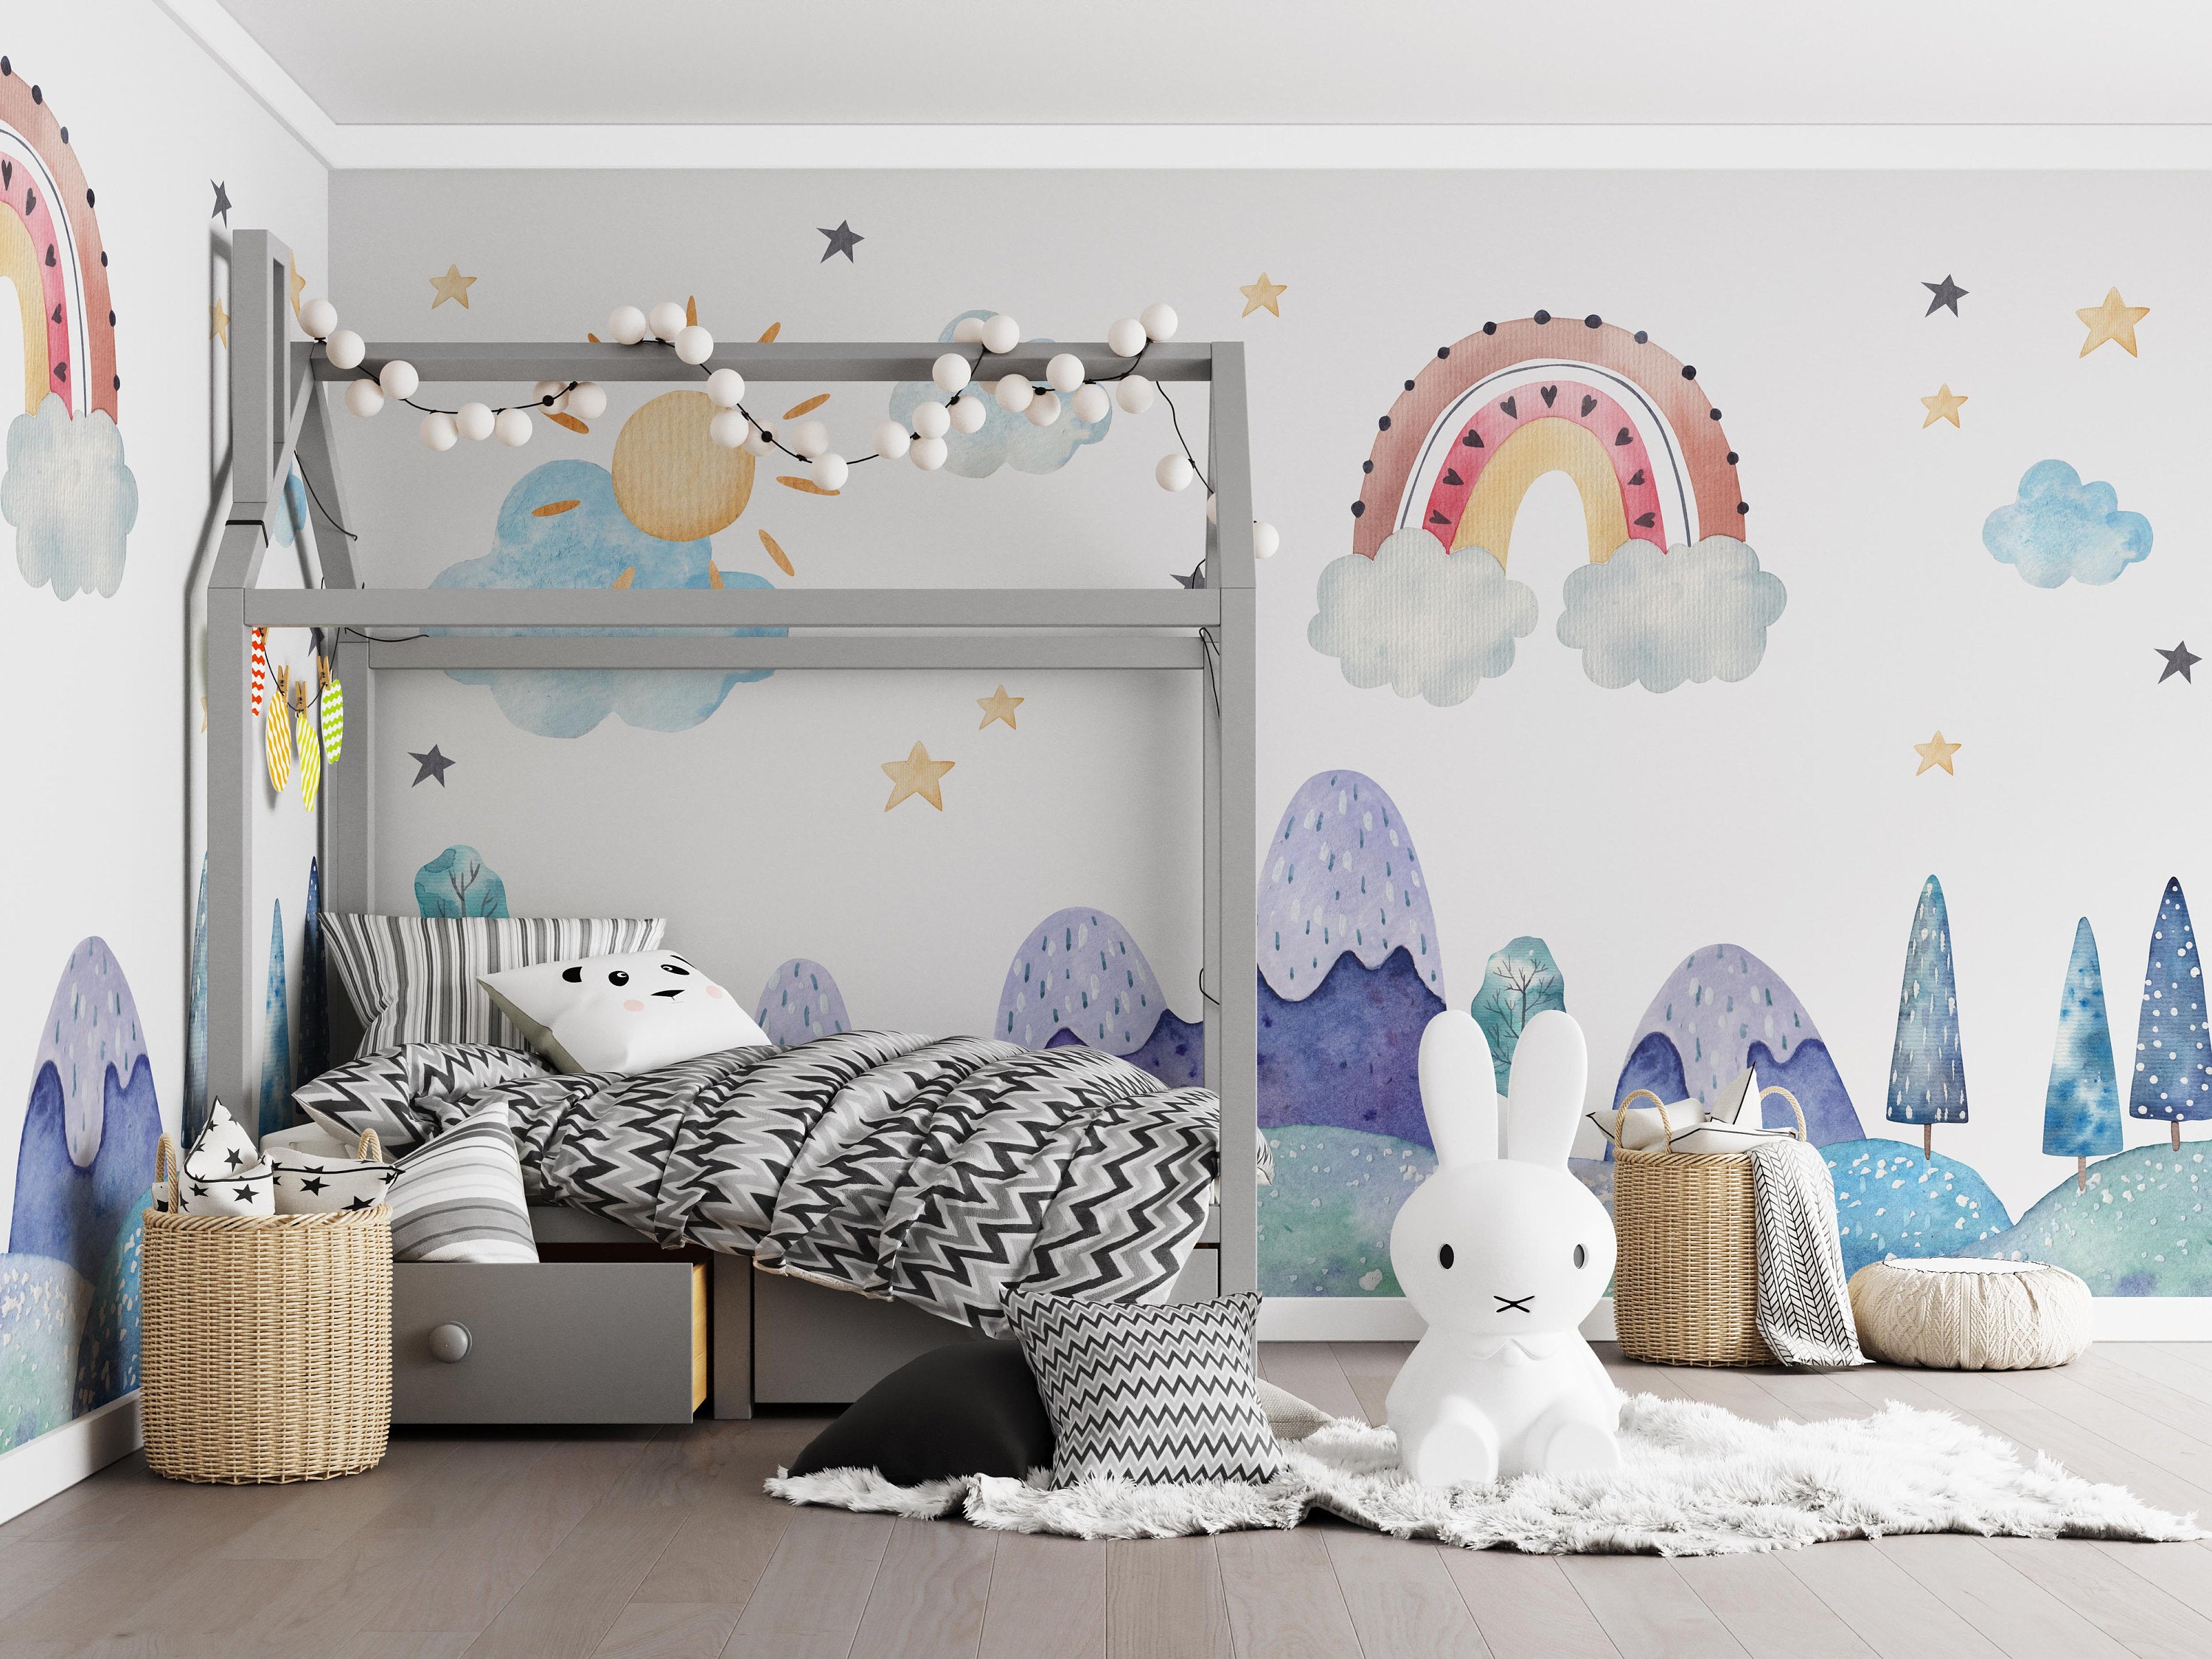 Rainbow on Rain Clouds Stars Mountains Trees Funny Wallpaper Self Adhesive Peel & Stick Wall Decoration Design Removable